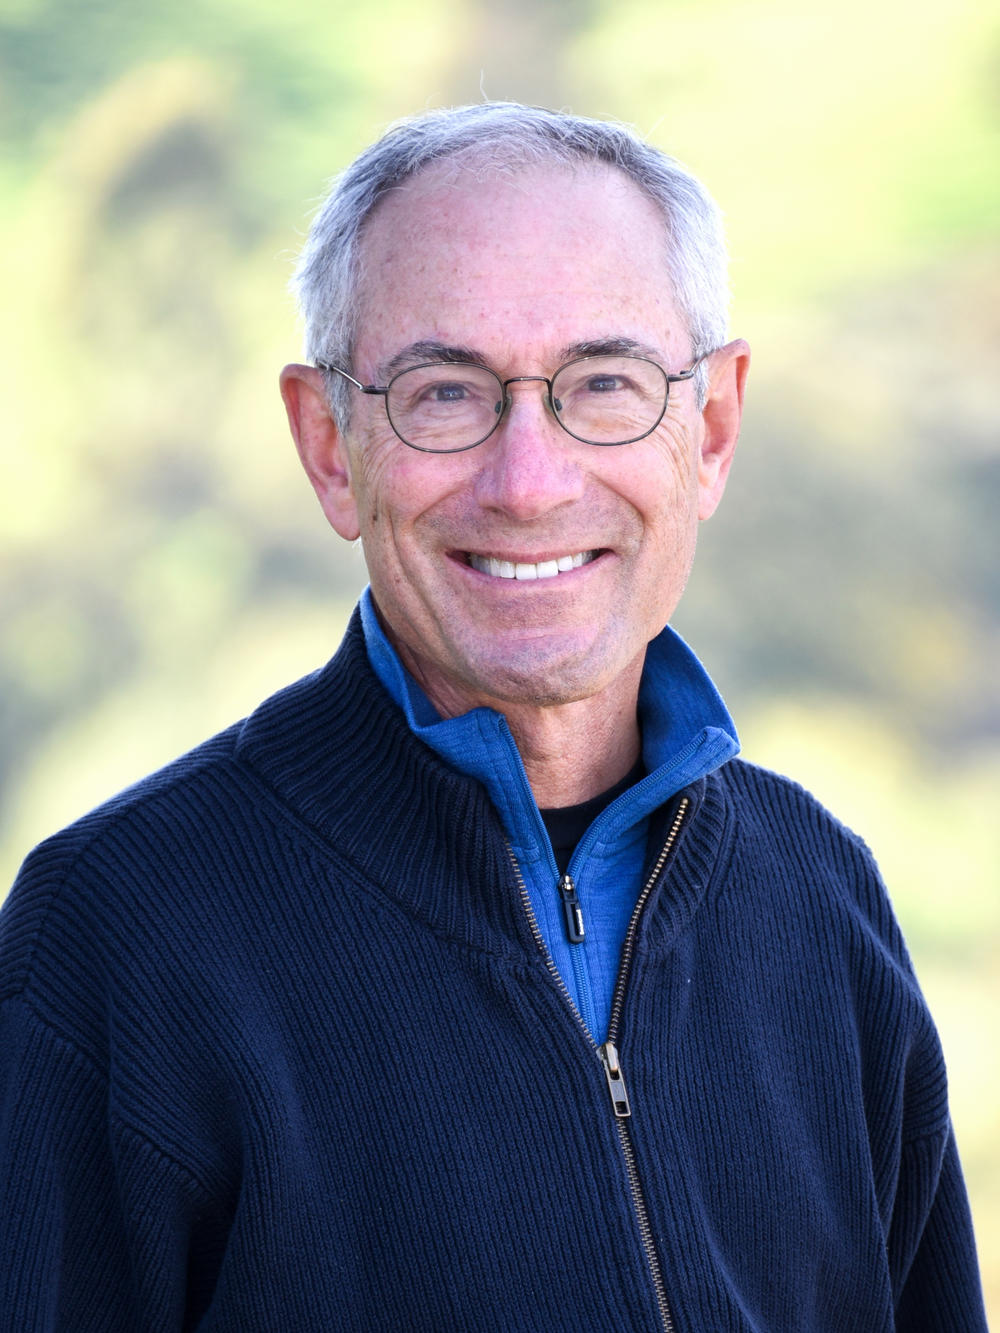 Thomas Insel, author of Healing: A Path from Mental Illness to Mental Health